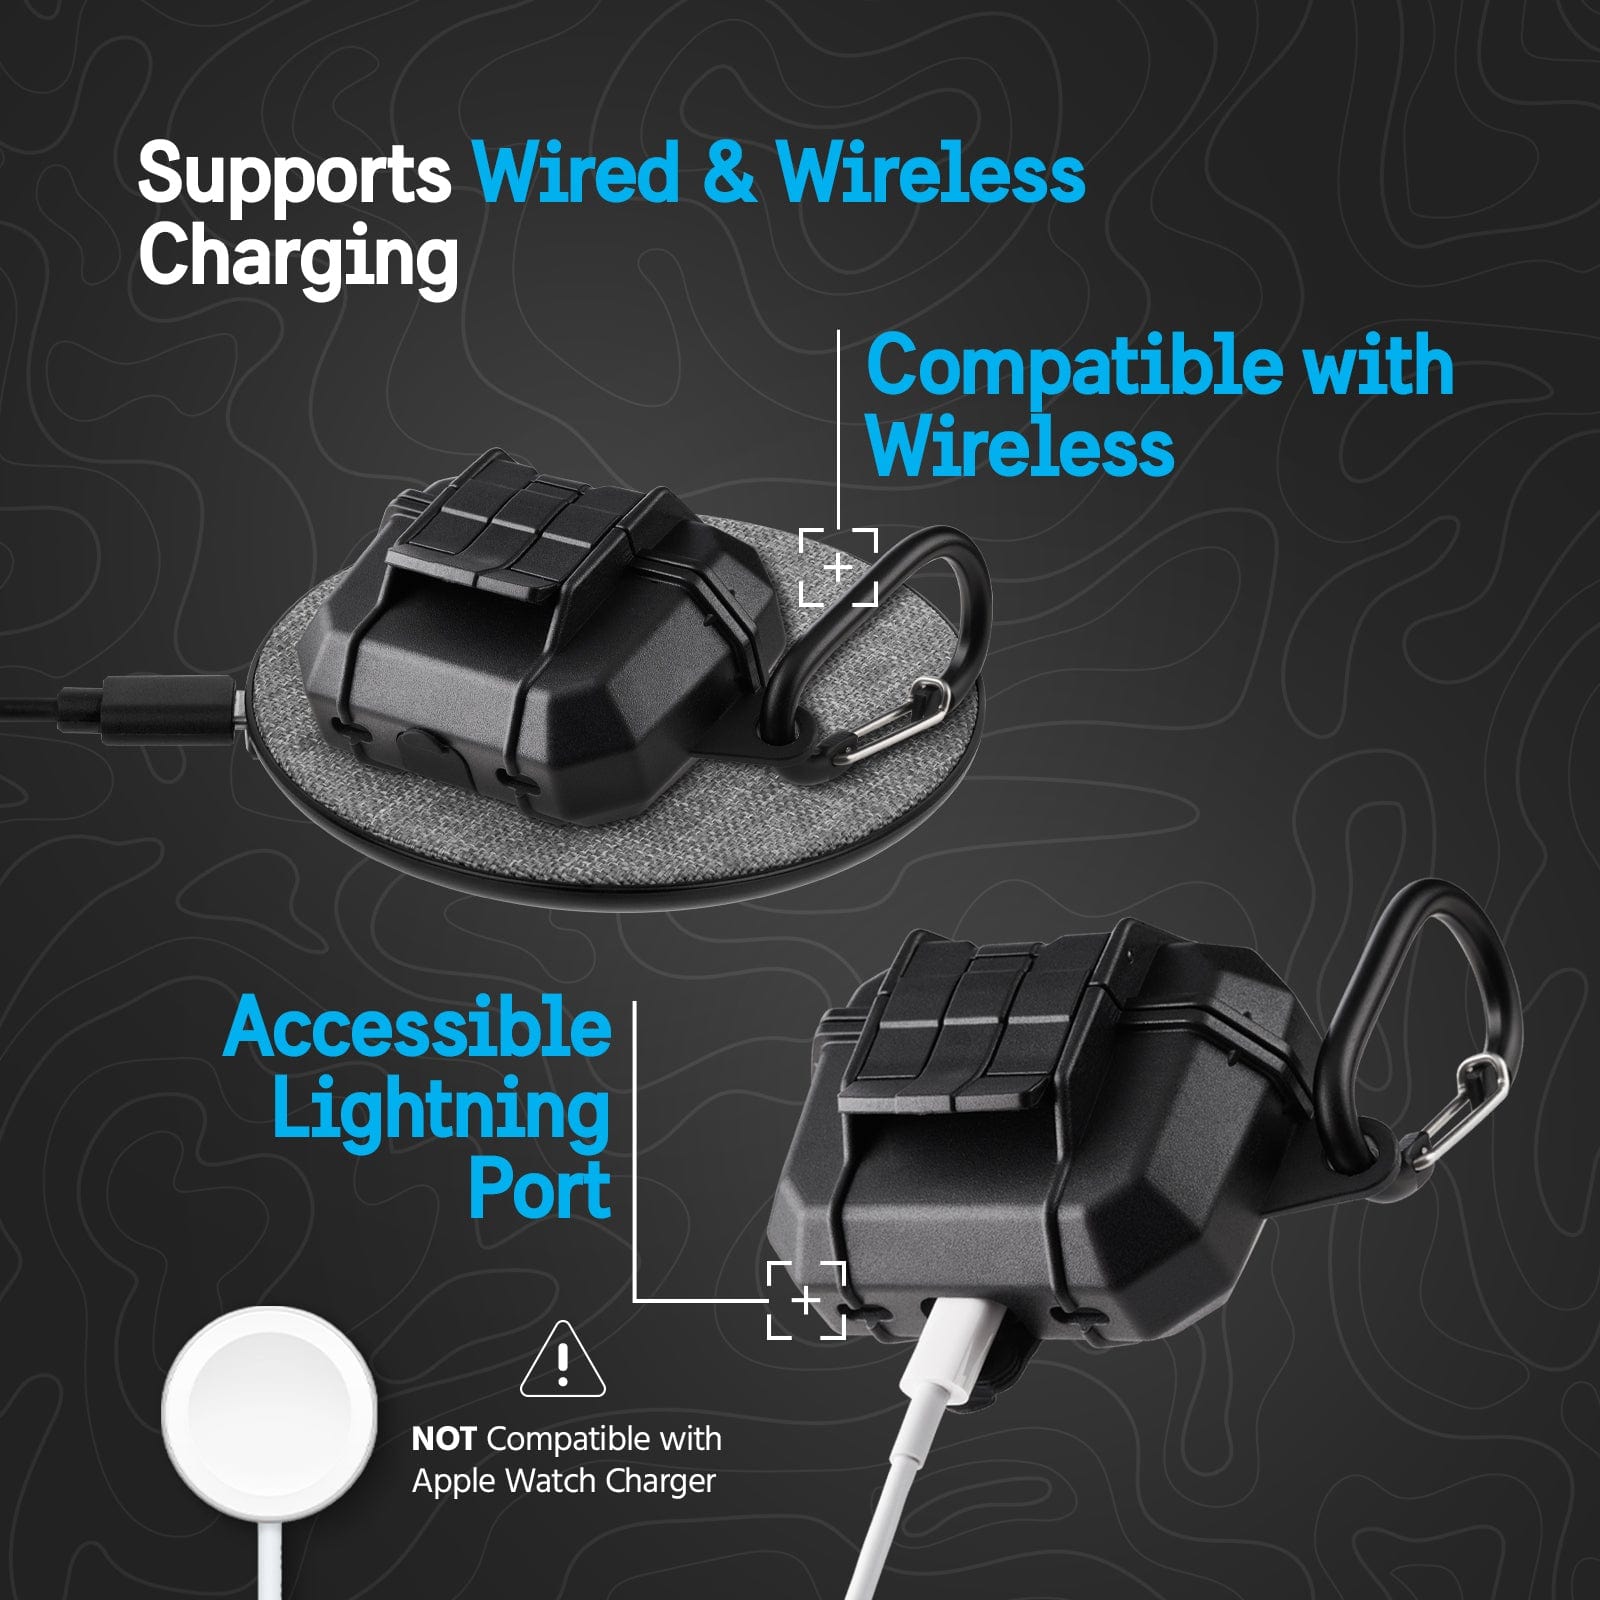 SUPPORTS WIRED AND WIRELESS CHARGING. COMPATIBLE WITH WIRELESS. ACCESSIBLE  LIGHTNING PORT. NOT COMPATIBLE WITH APPLE WATCH CHARGER